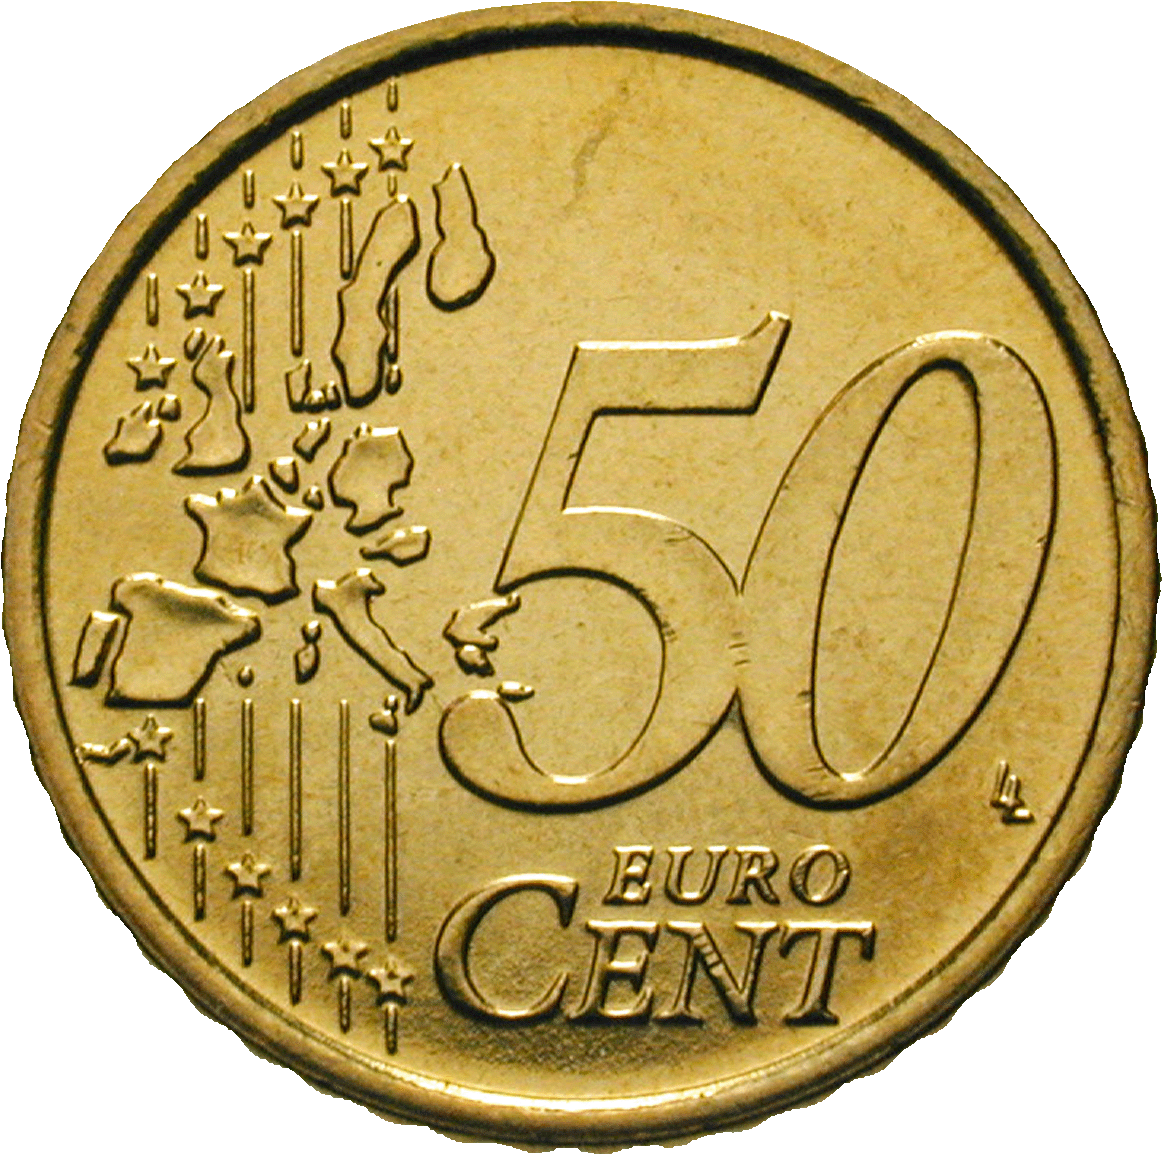 50 Euro Cent Coin PNG